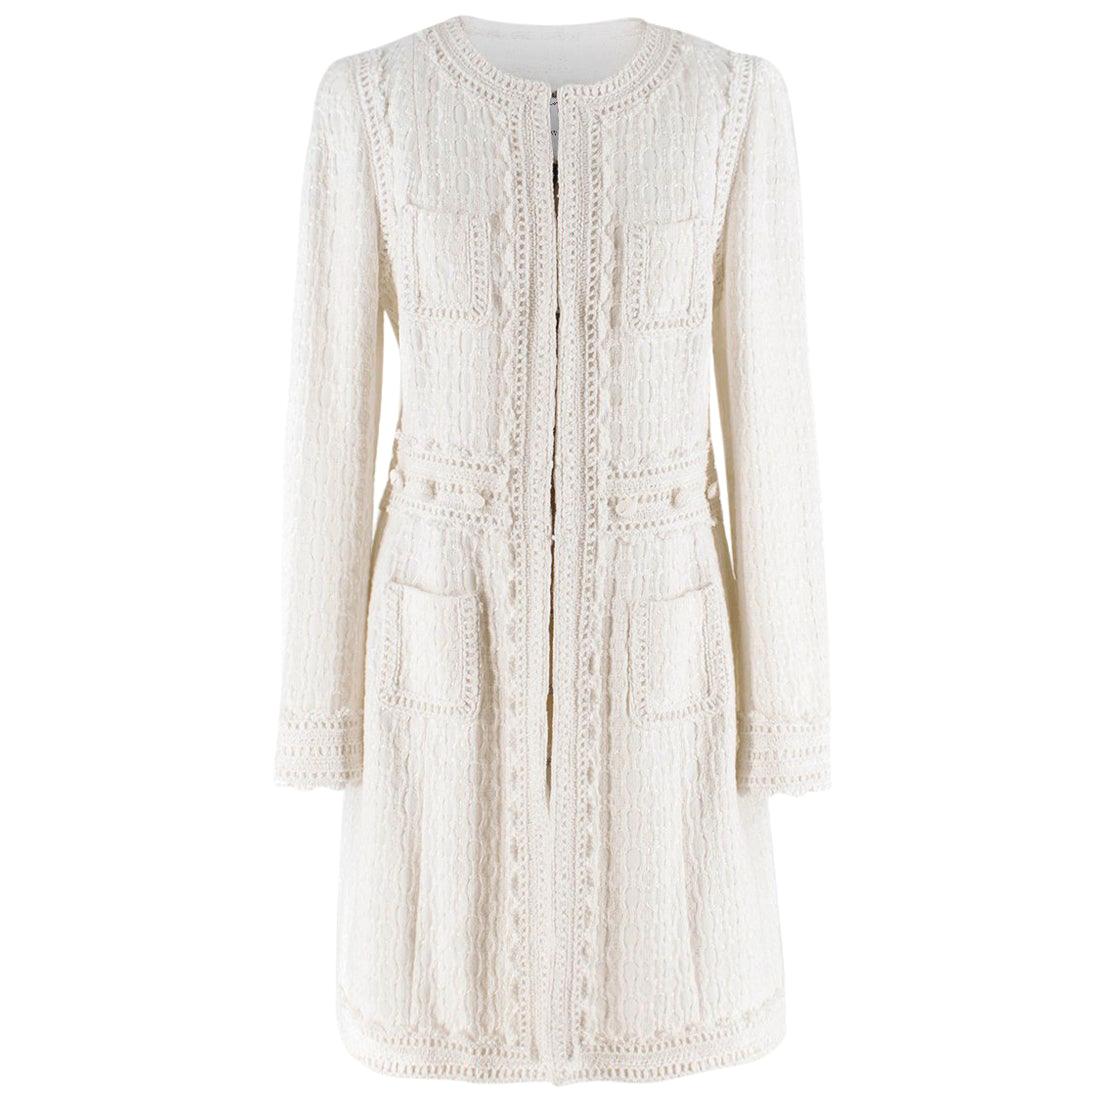 Andrew GN white collarless tweed coat US 10